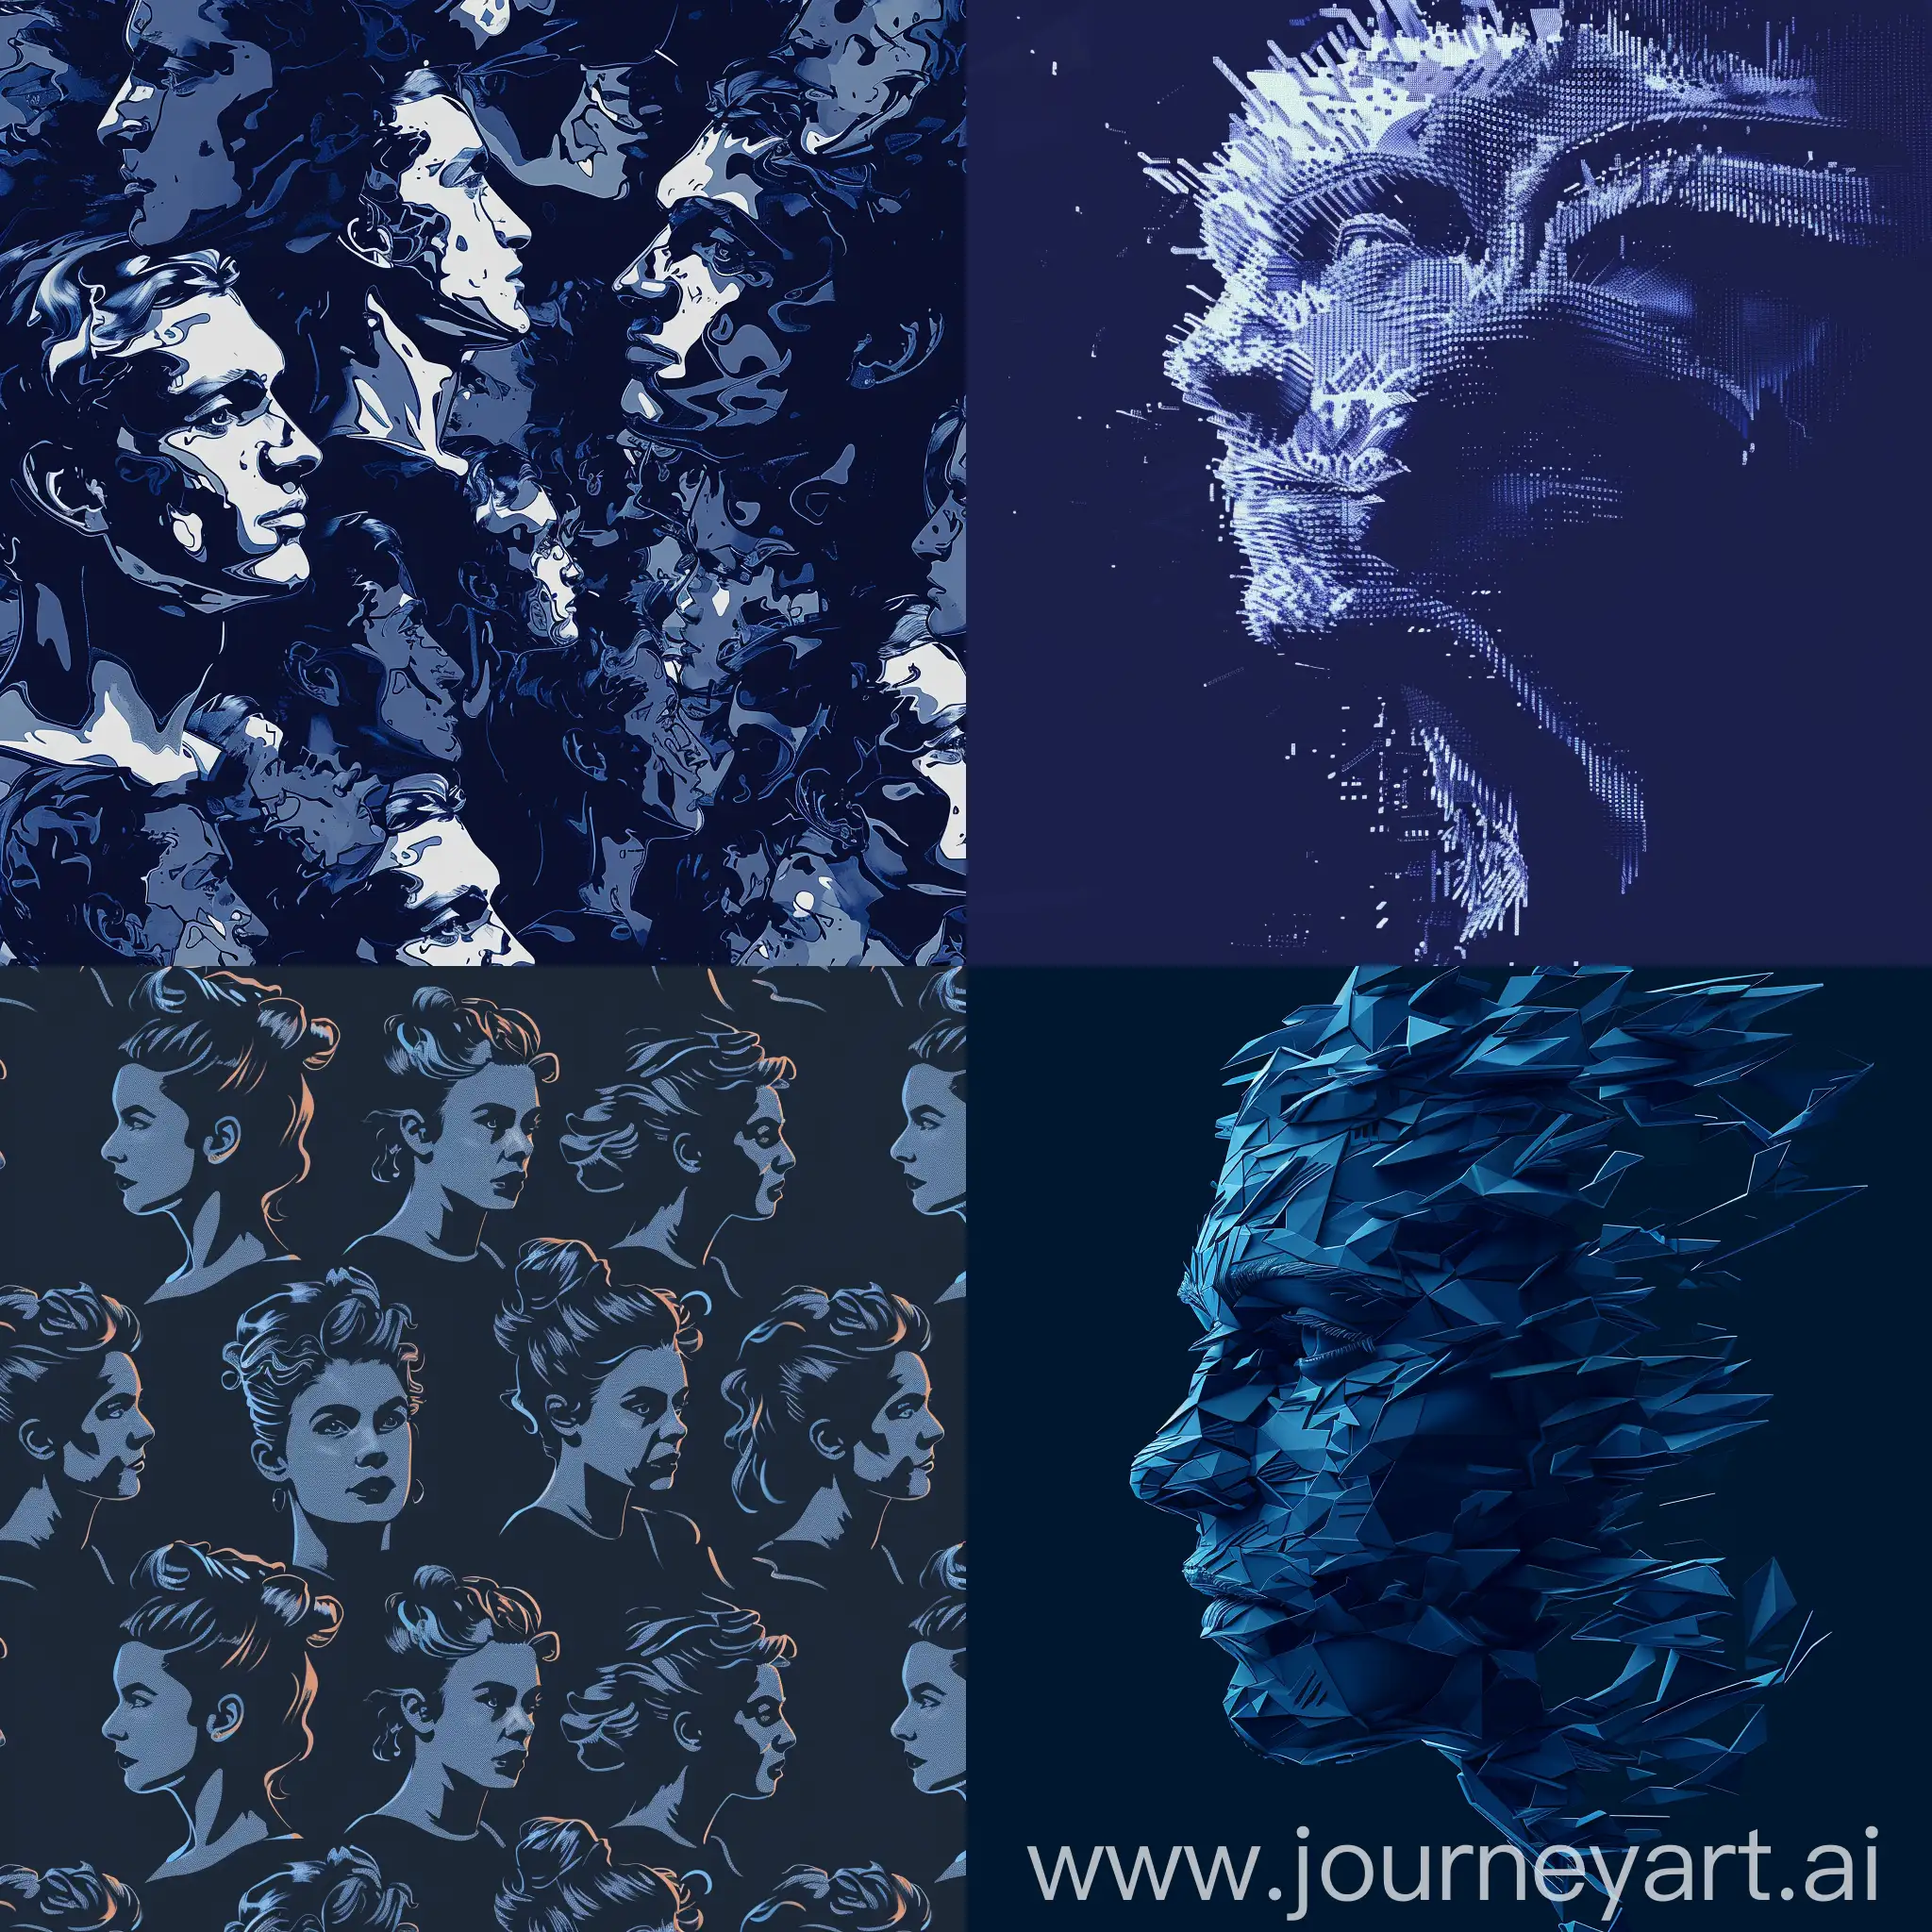 I intend to create an NFT design using artificial intelligence. The type of image is portraits. The color pattern I have in mind for this design is:  Navy Blue (